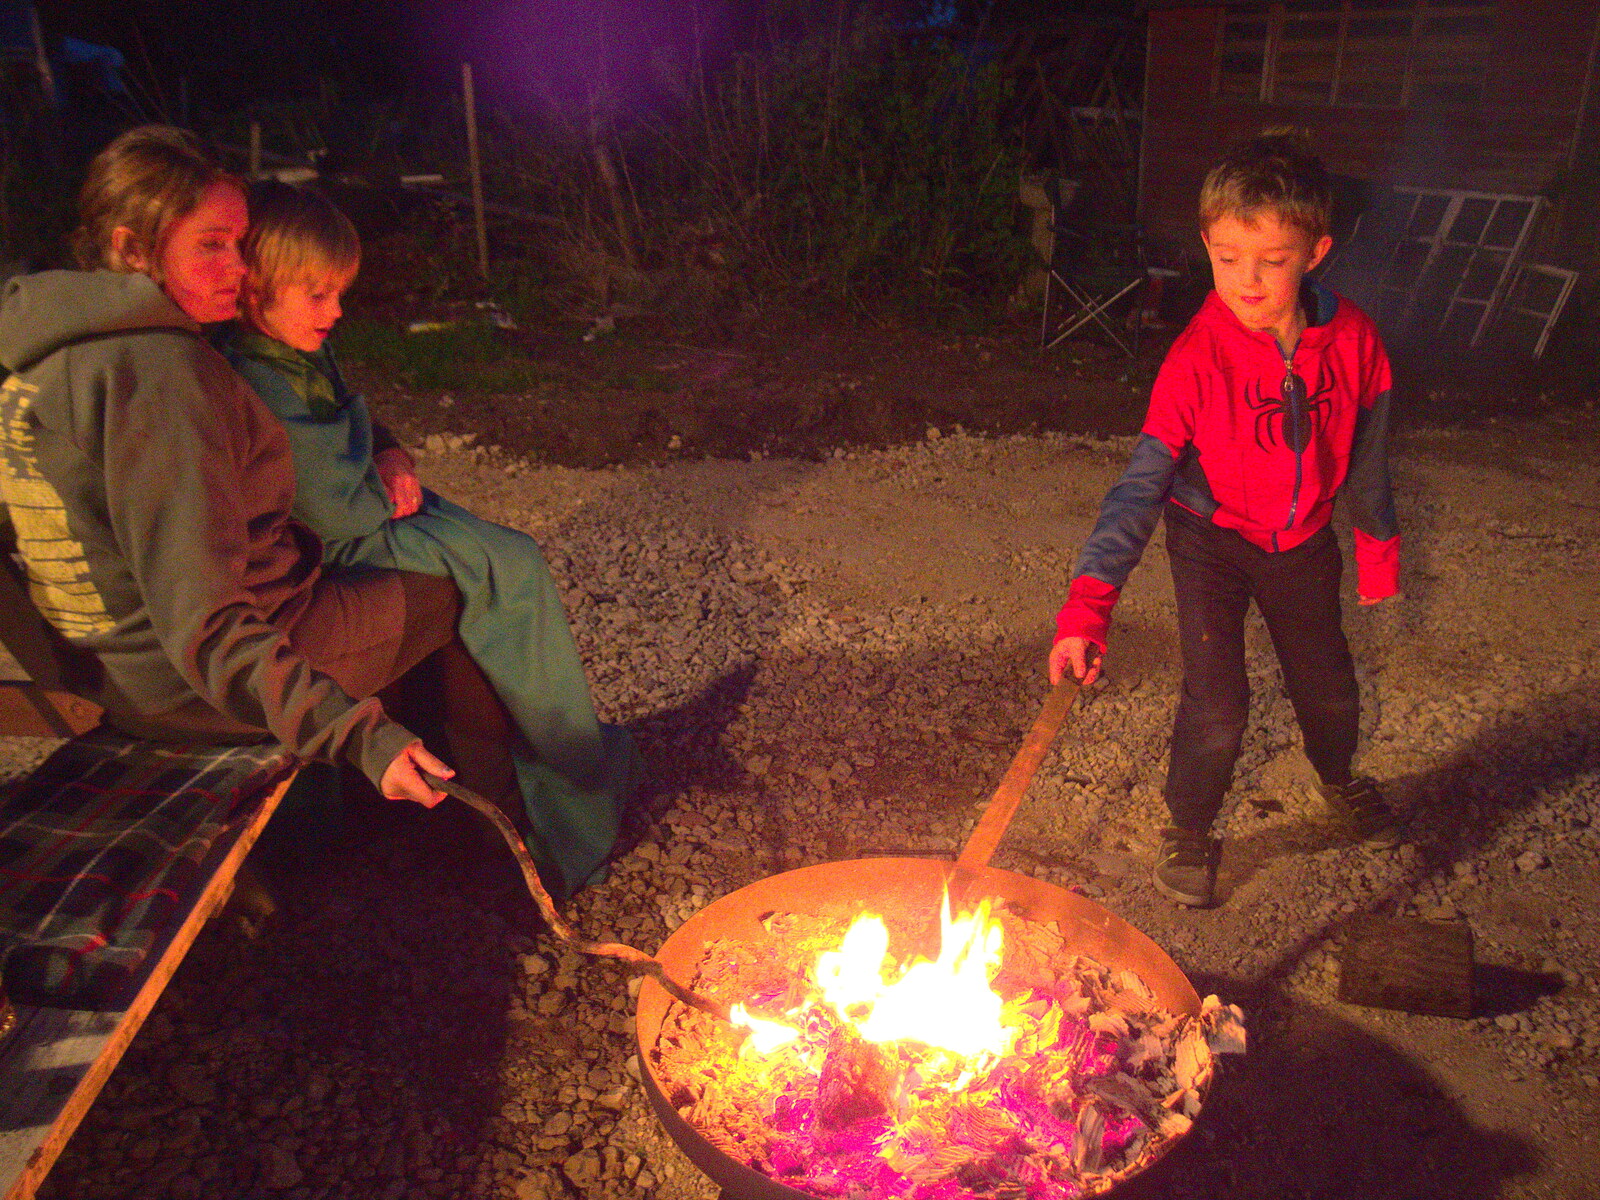 Isobel, Harry and Fred around the fire from Campfires, Oaksmere Building and a BSCC Bike Ride, Brome, Suffolk - 4th May 2017